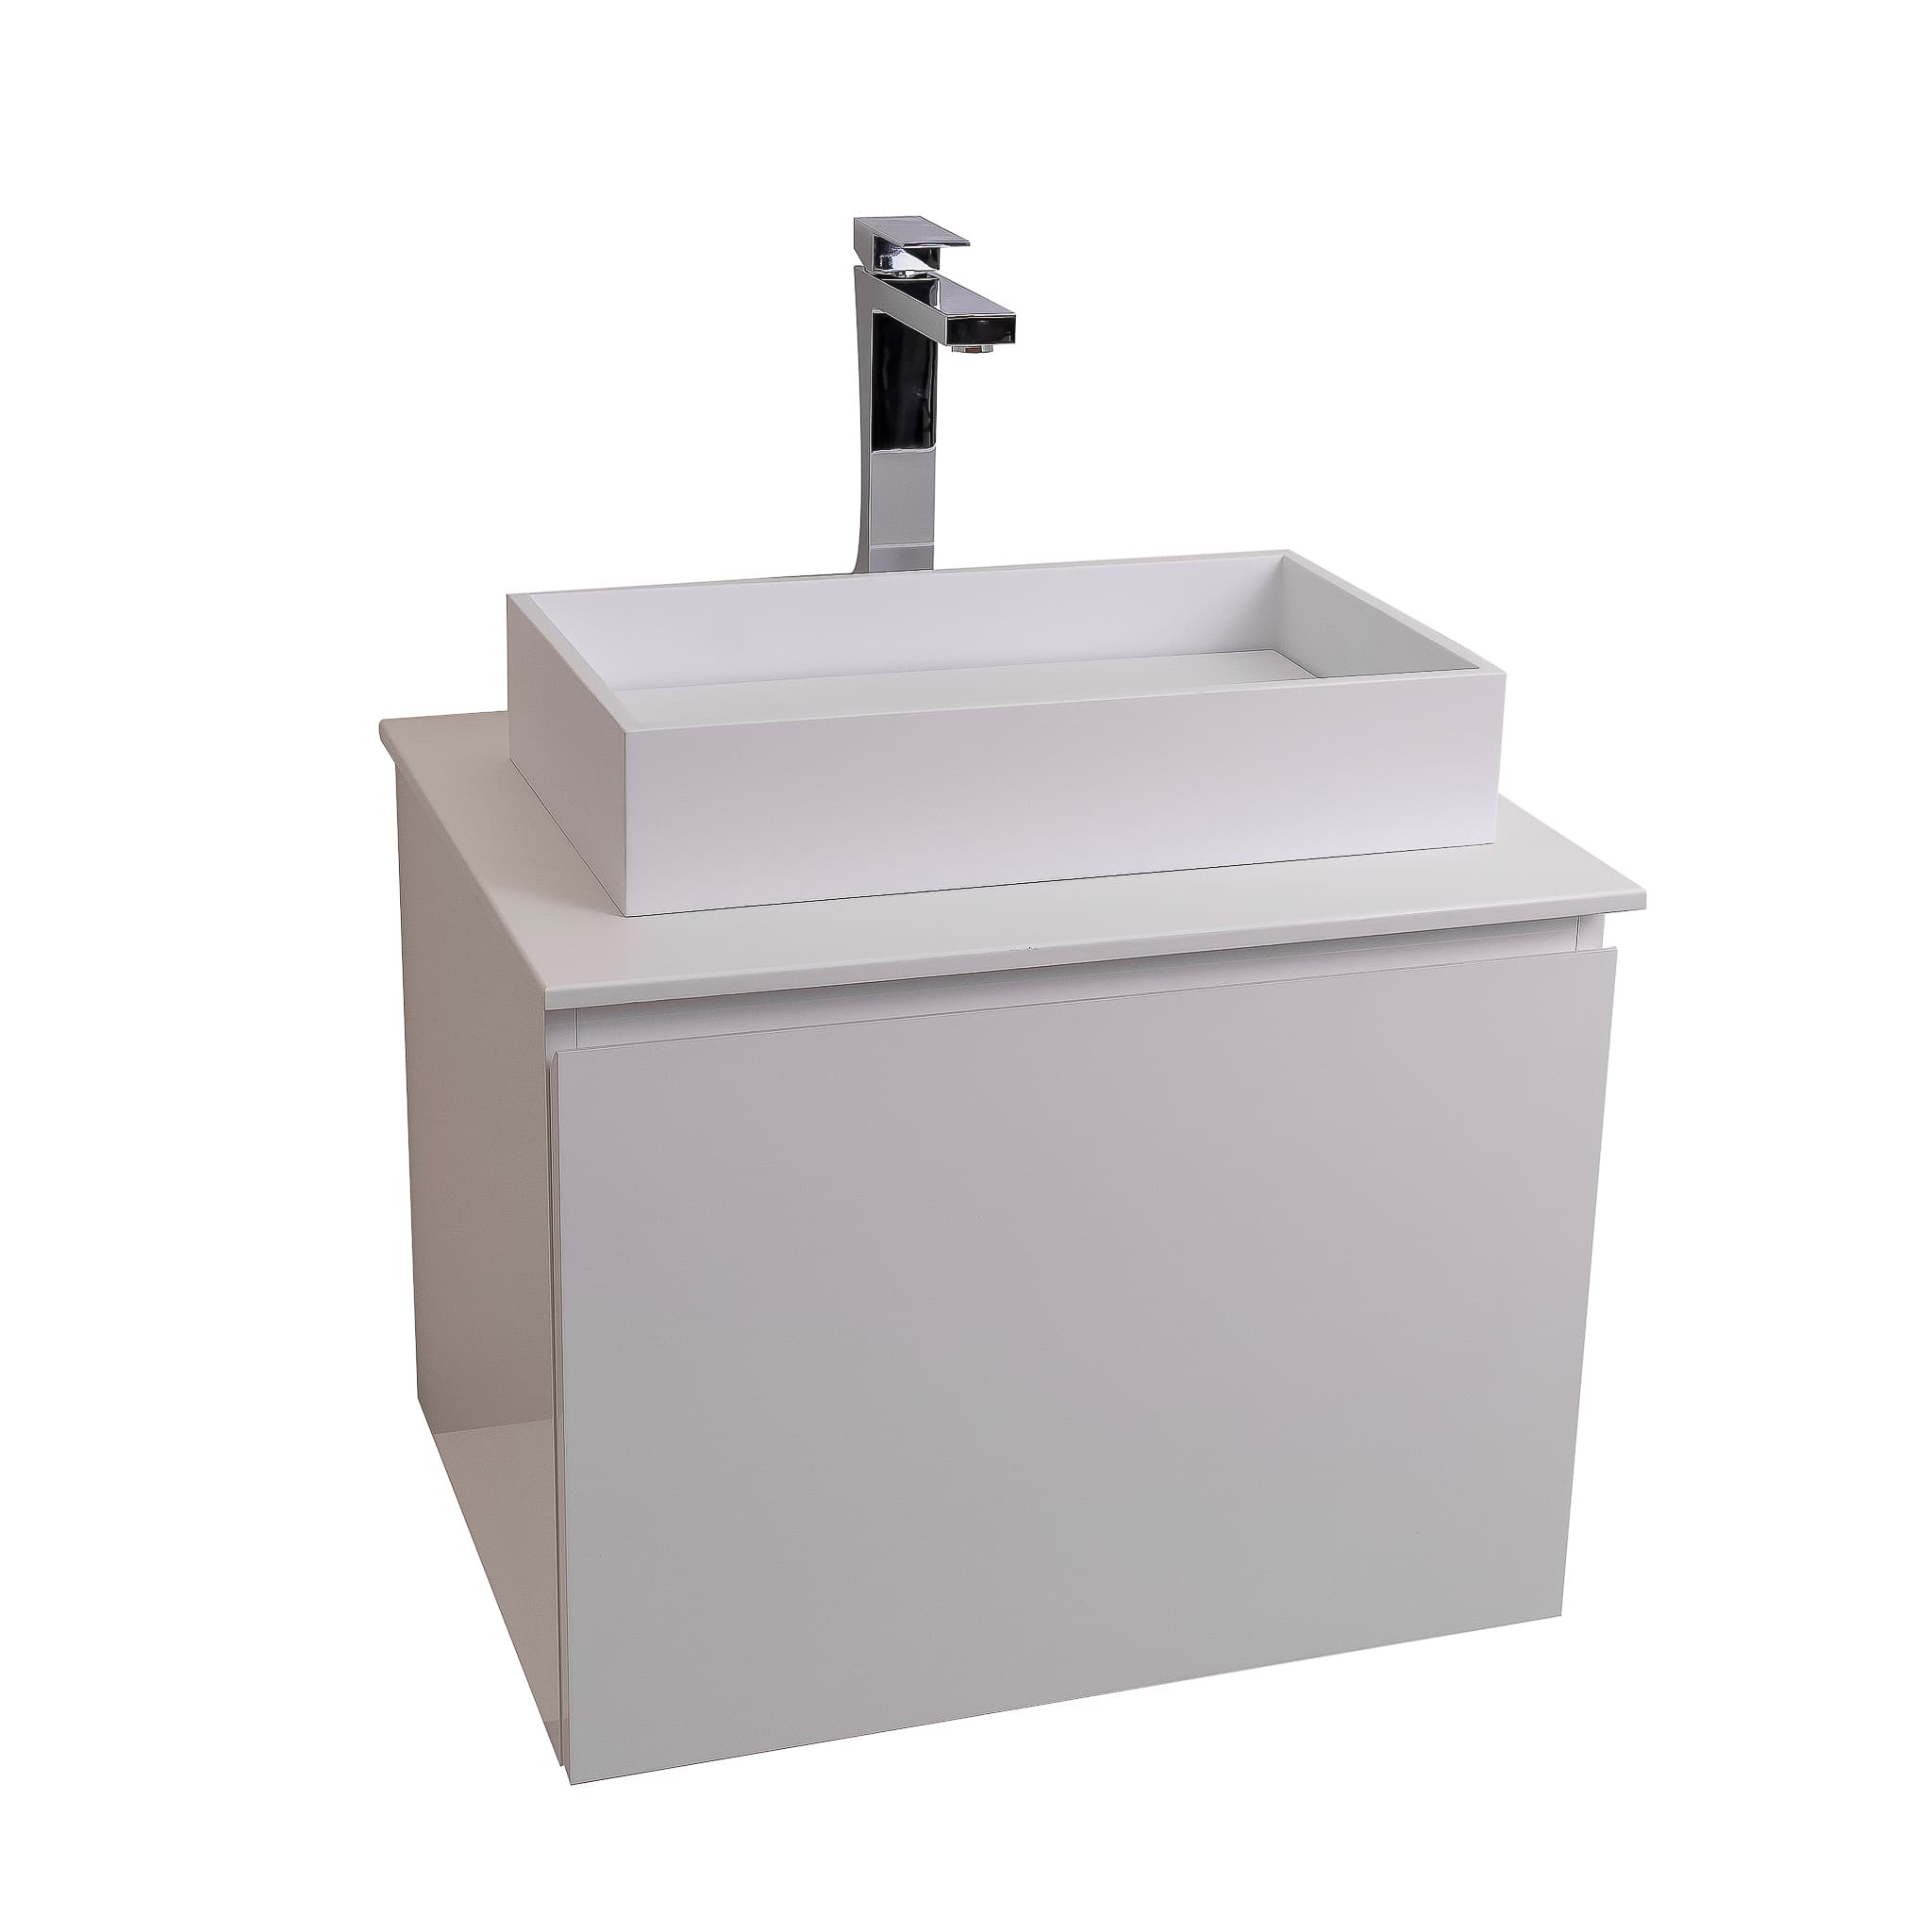 Venice 23.5 White High Gloss Cabinet, Solid Surface Flat White Counter And Infinity Square Solid Surface White Basin 1329, Wall Mounted Modern Vanity Set